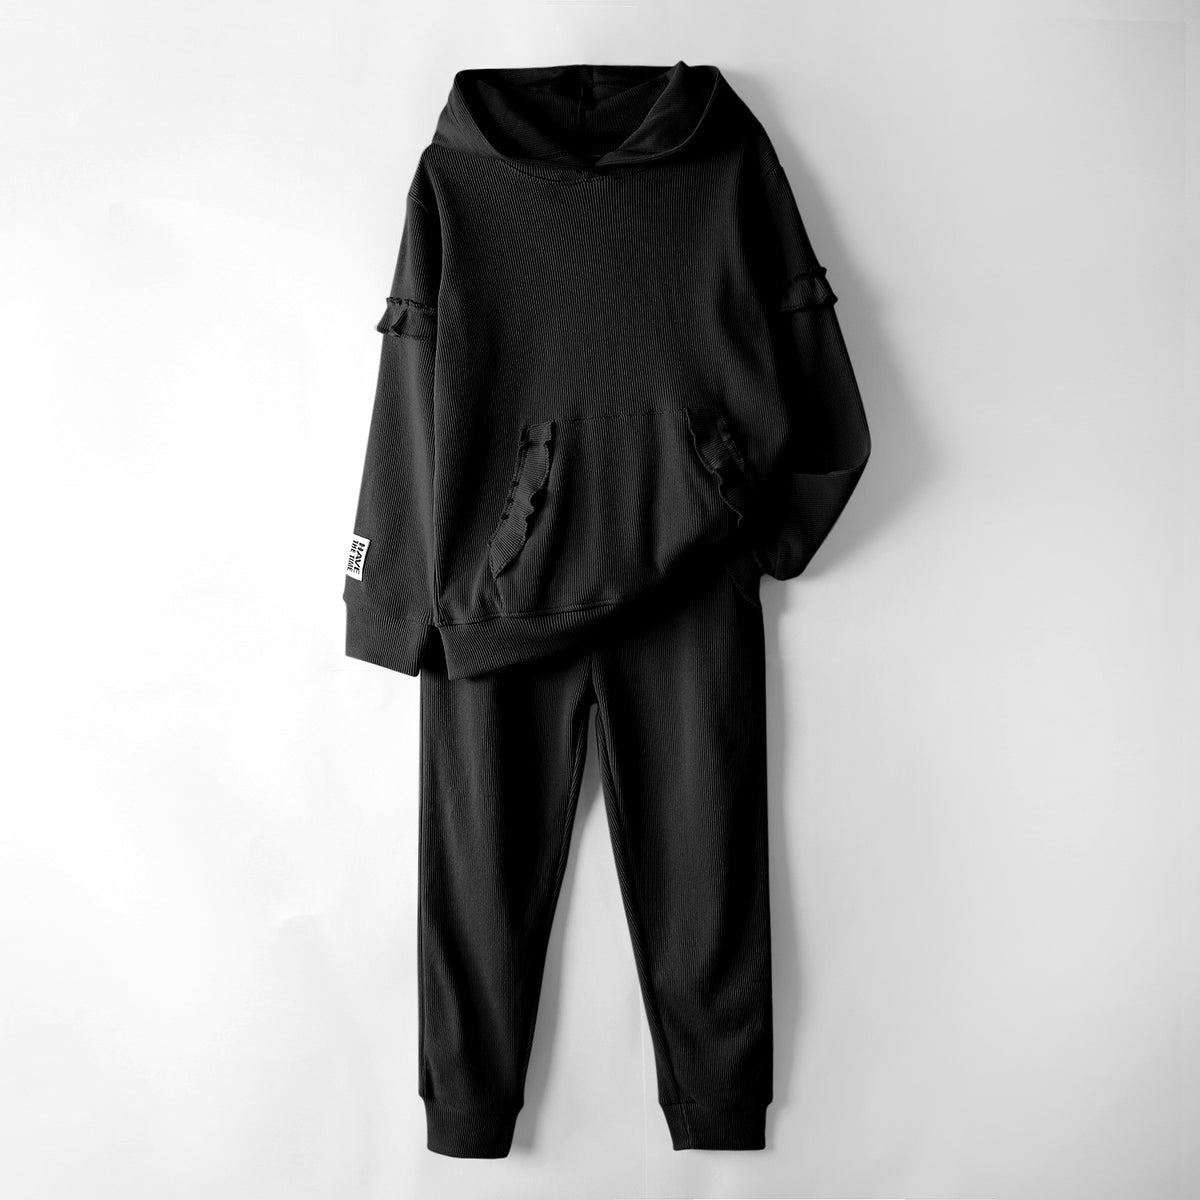 Premium Quality 2 Piece Frill Black Tracksuit For Girls